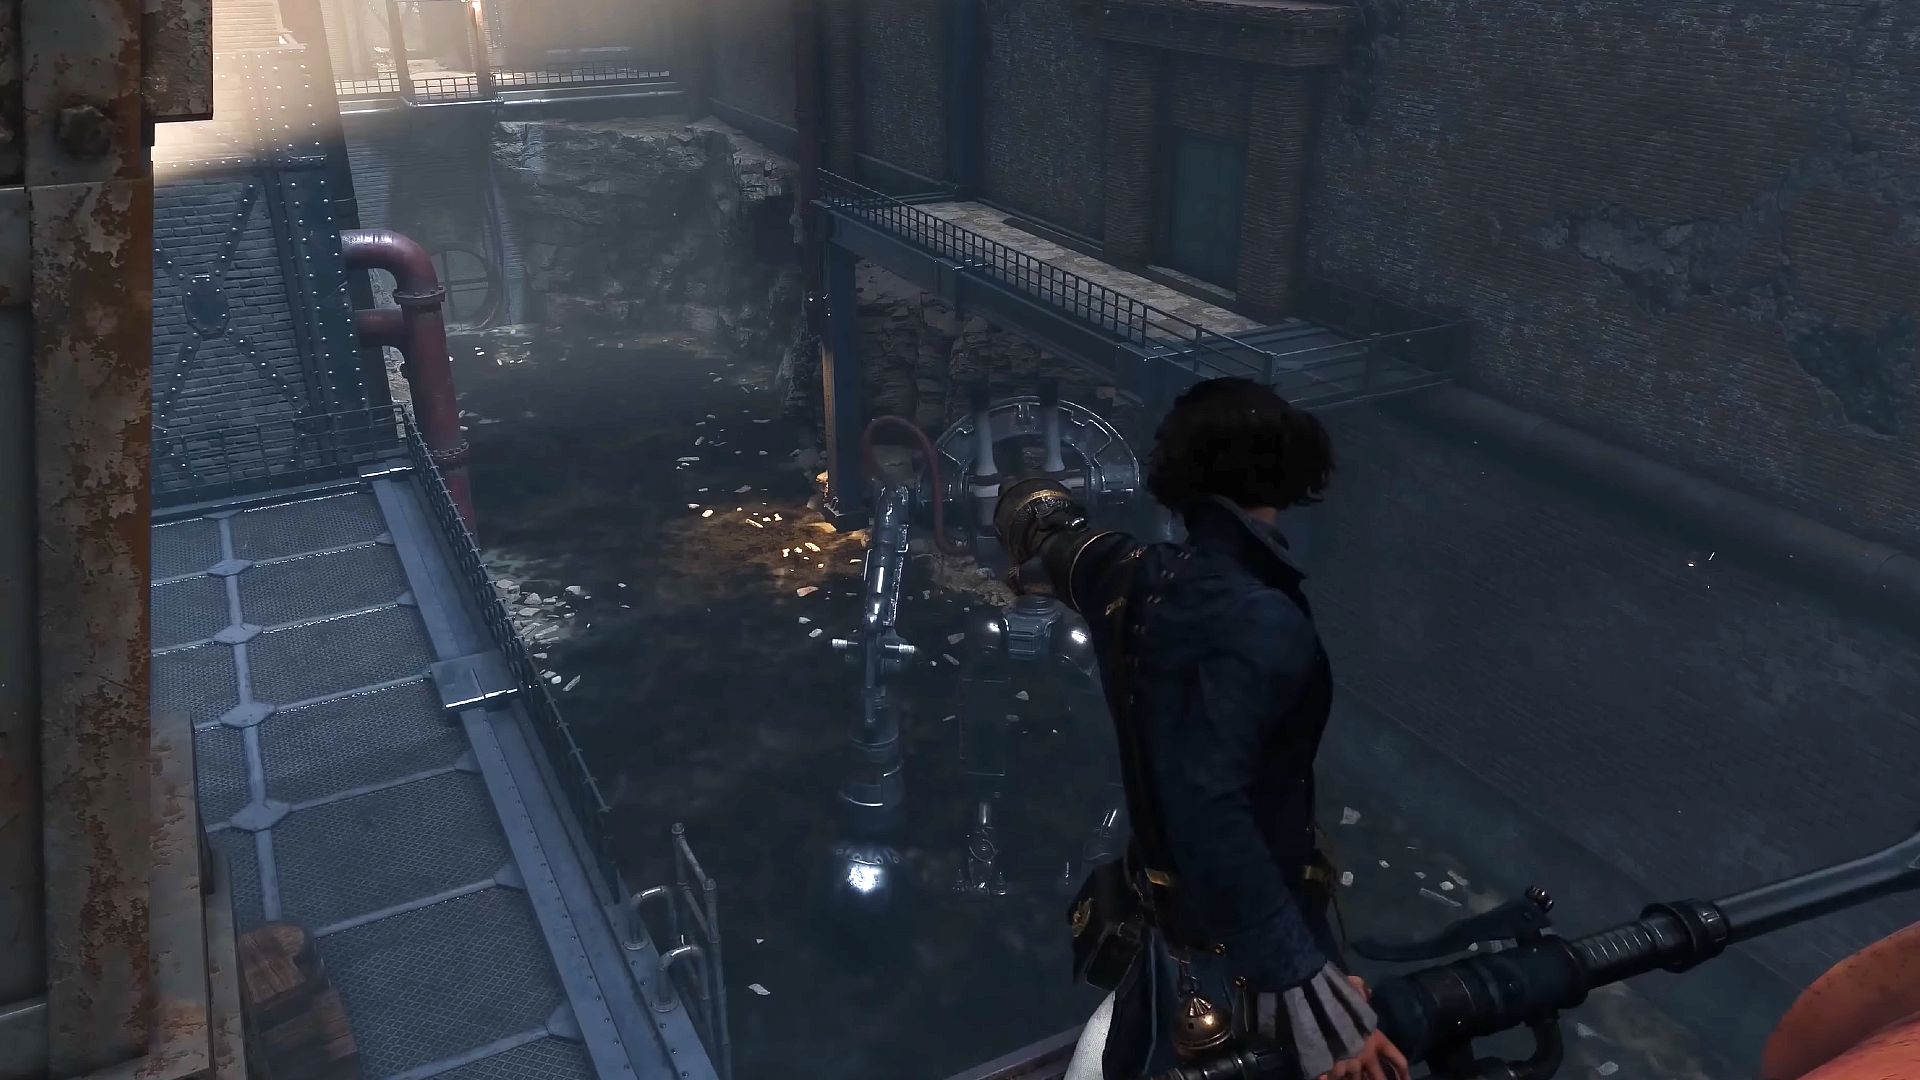 Lies of P's Bloodborne comparison: Pinocchio aiming a wrist-mounted pistol at a large mechanical soldier